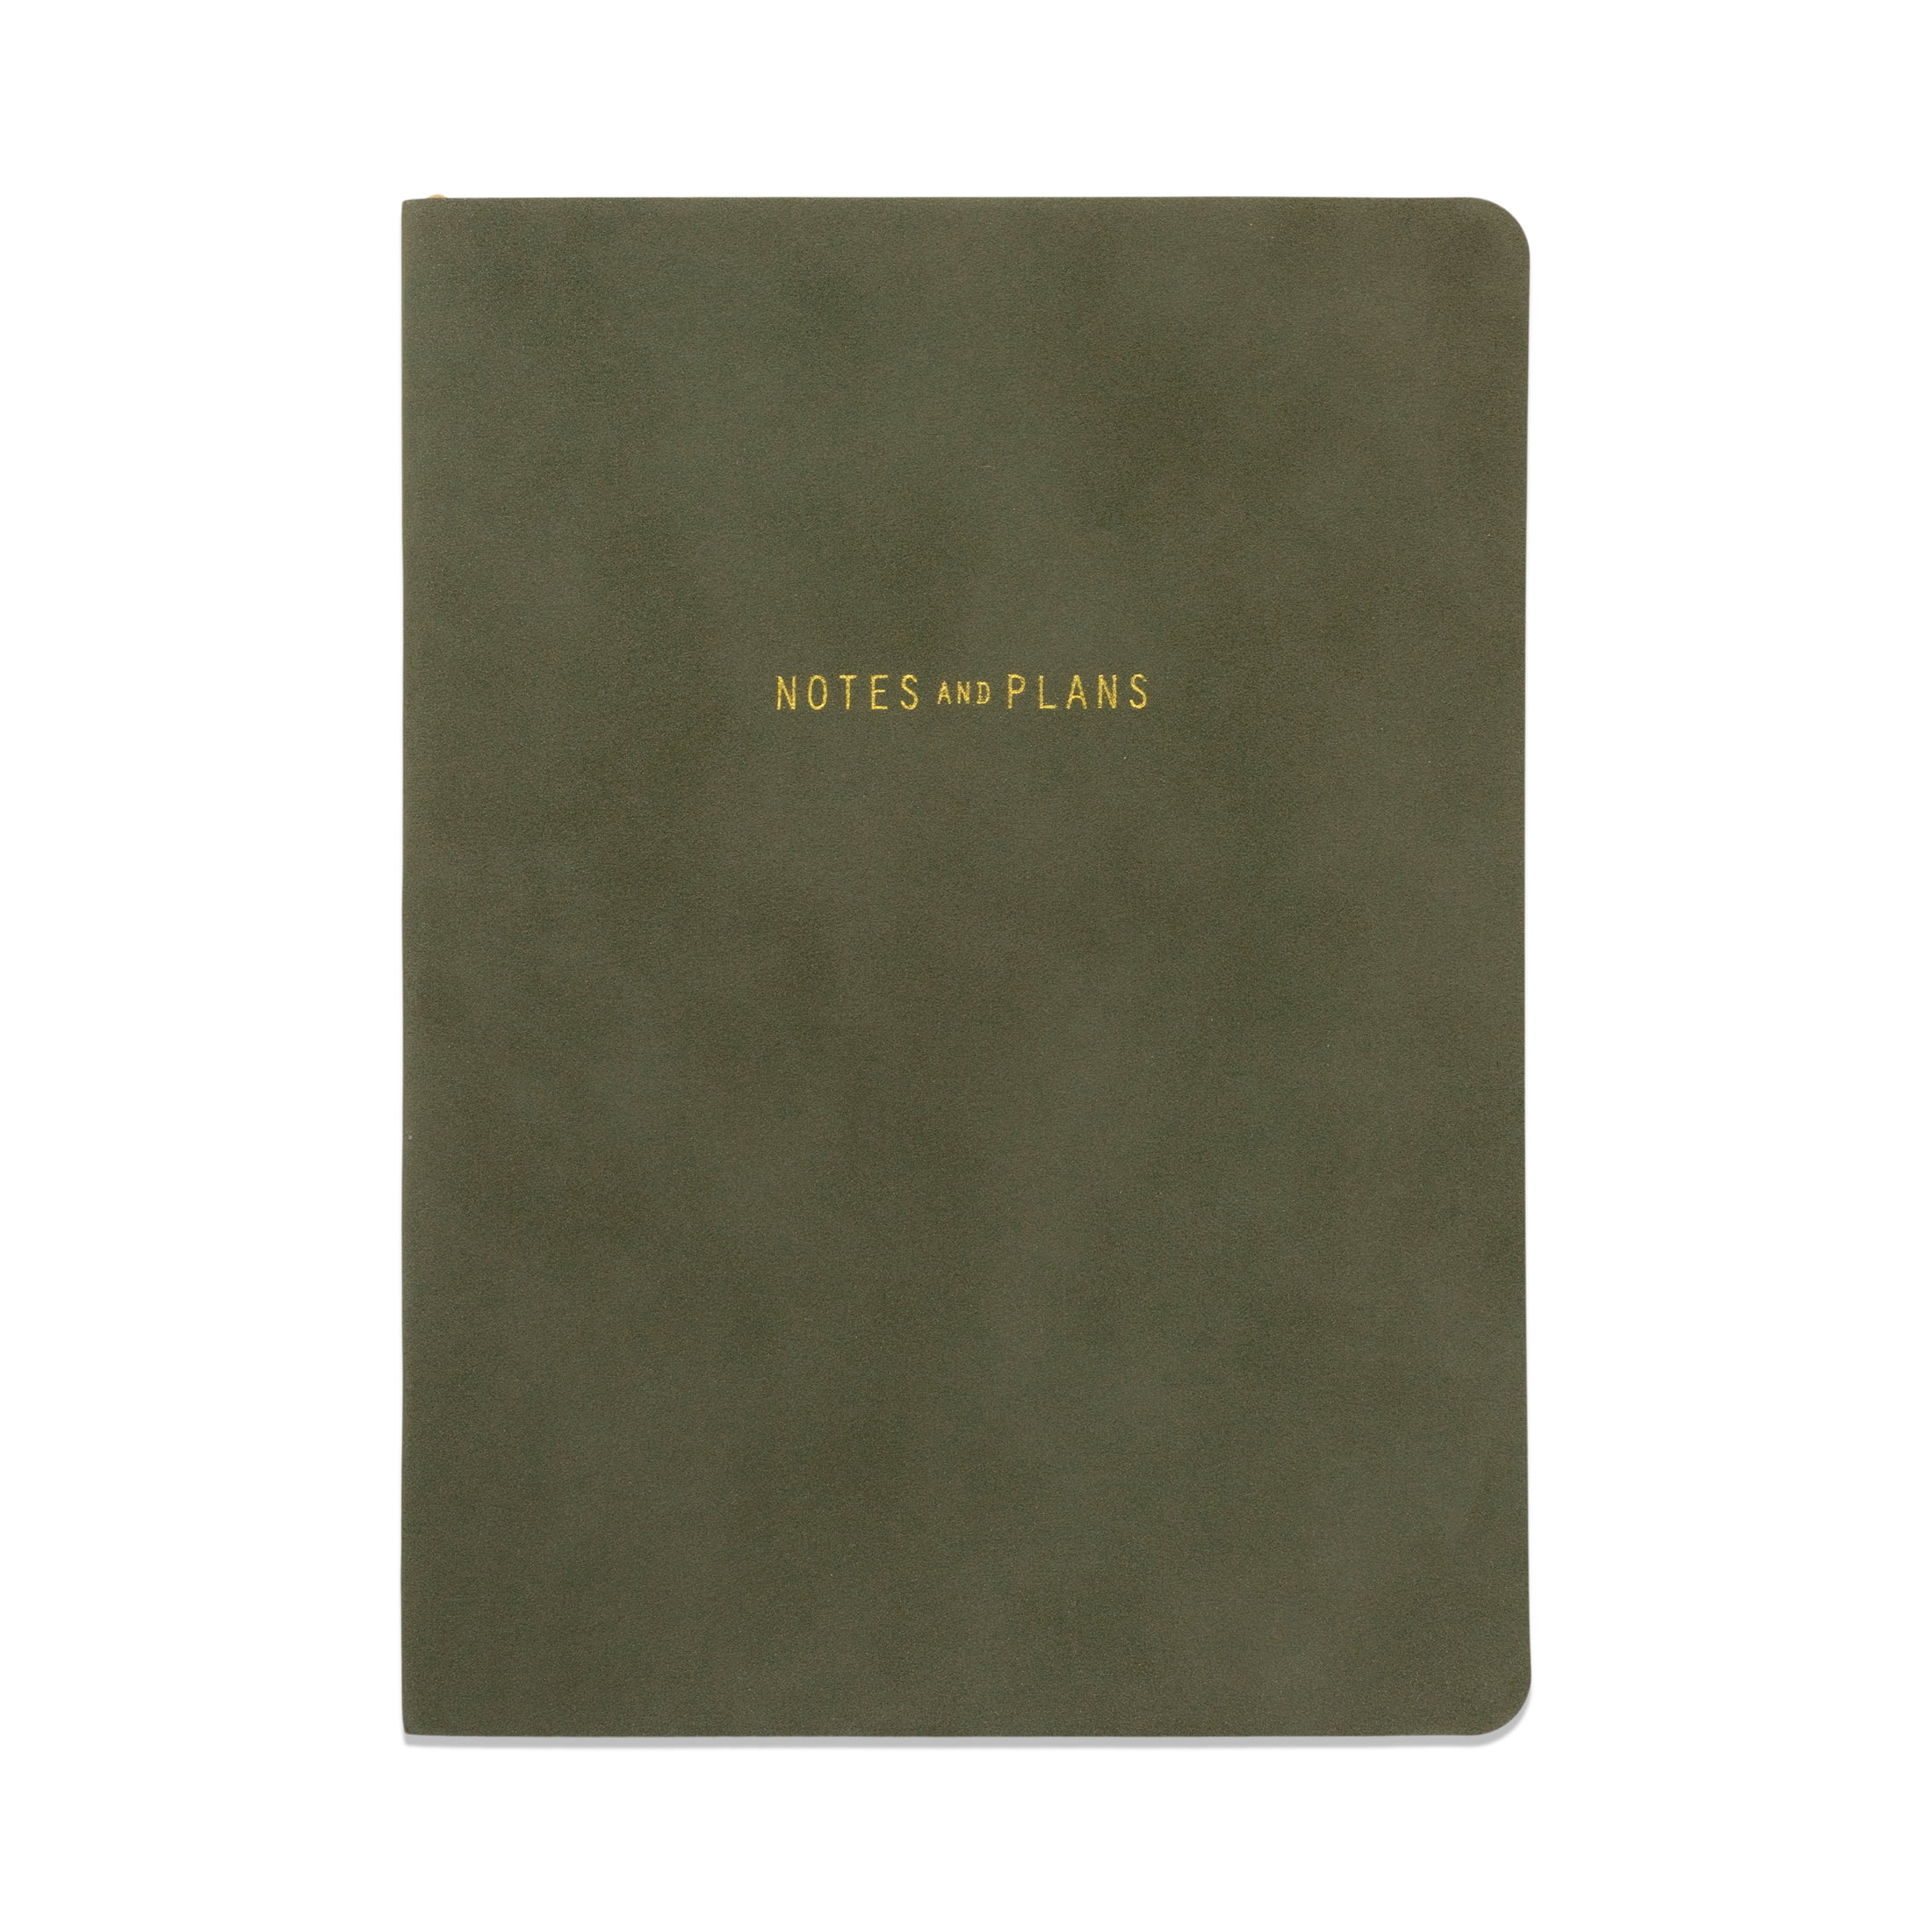 Pen + Gear Flex Suede Journal, Olive, 5.75" x 8" x 0.5", 192 Lined Pages, 96 Sheets